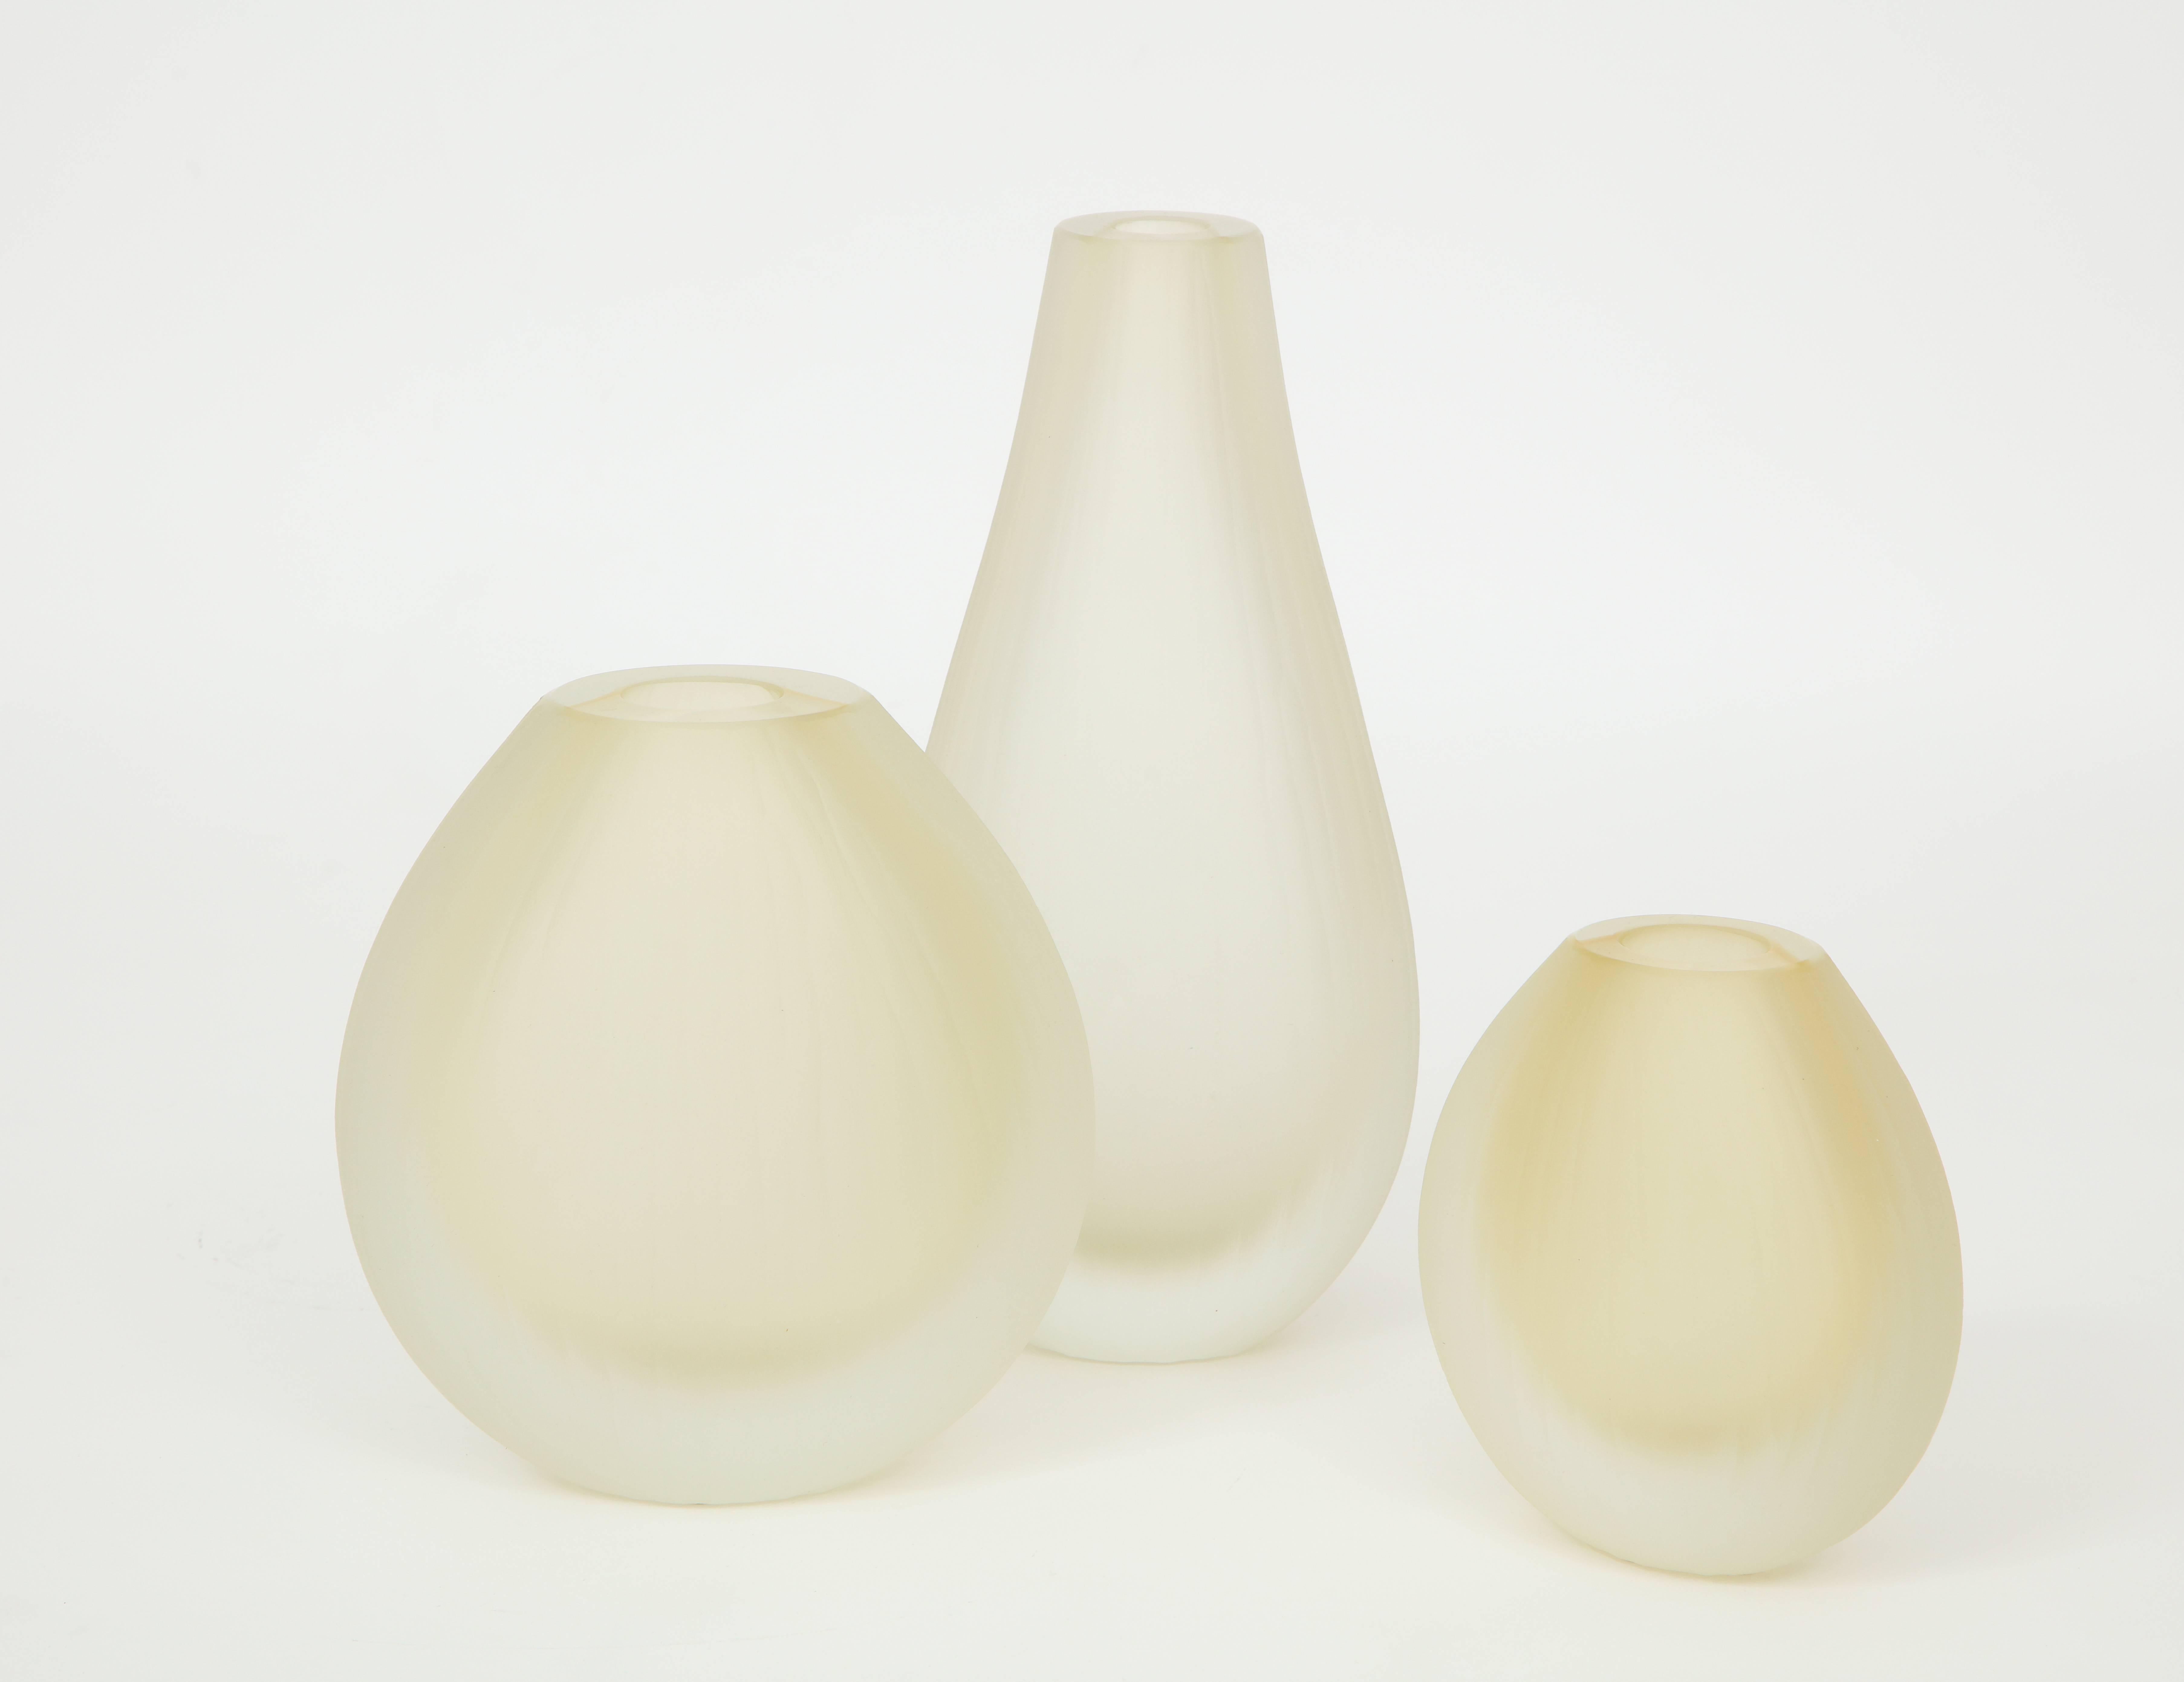 Set of three handblown oval Murano glass vases. Glass is softly ridged and frosted to give it that "iced" look. The color is absolutely stunning varying in shades of yellow/citrine. Signed by the Murano glass master himself. Vases vary in